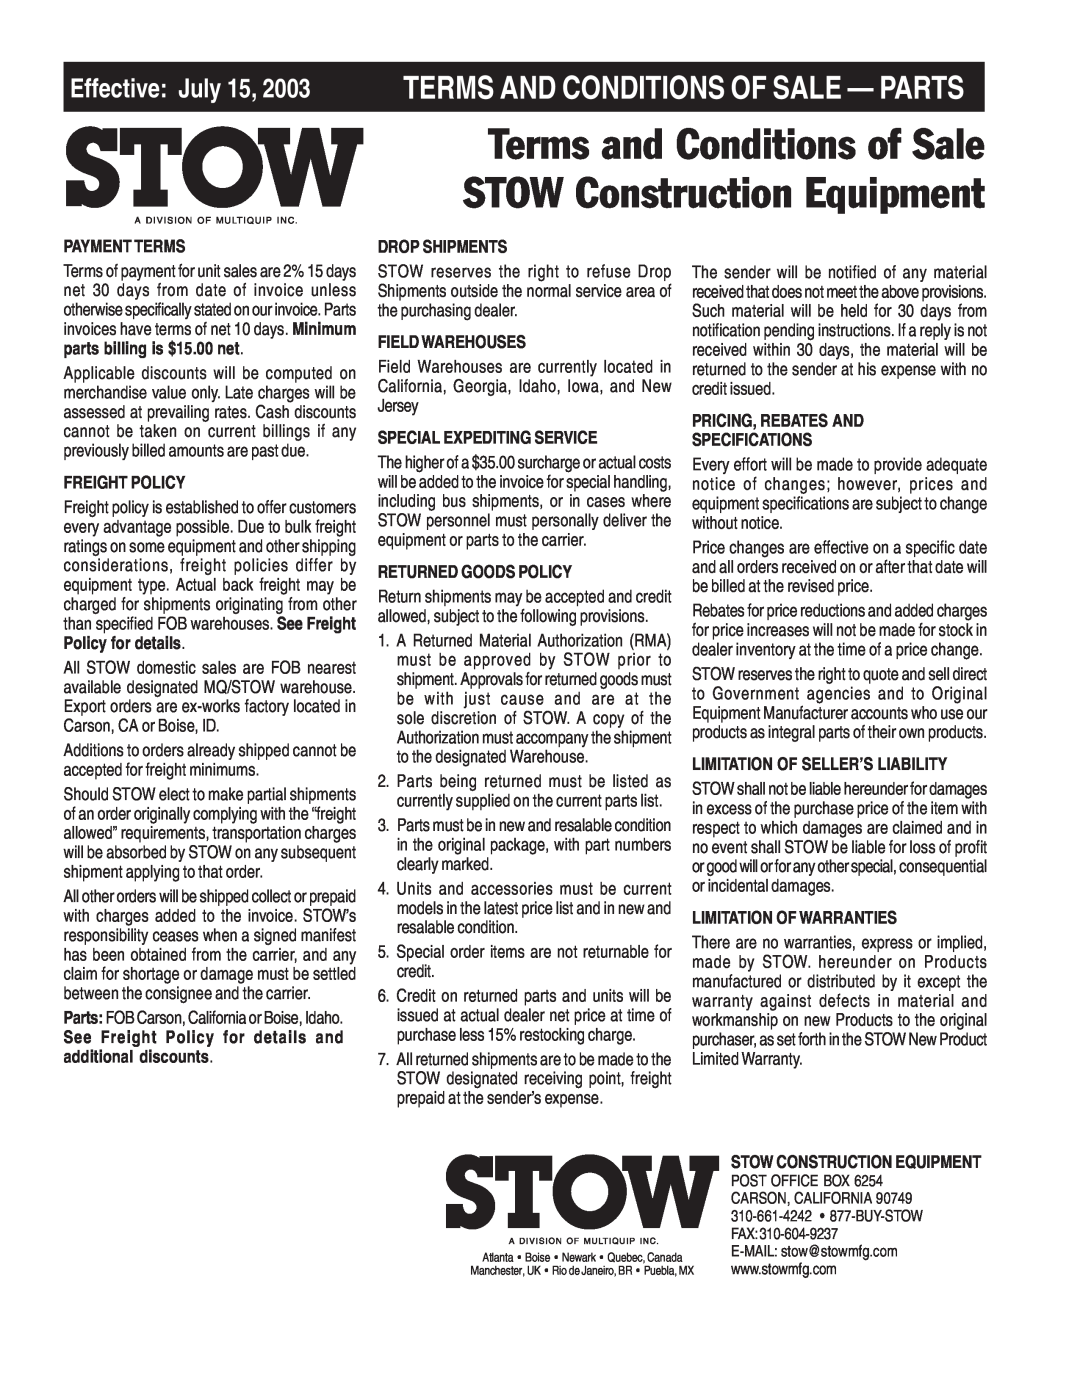 Stow 20HP, 13HP manual Terms And Conditions Of Sale - Parts, Effective July 15 